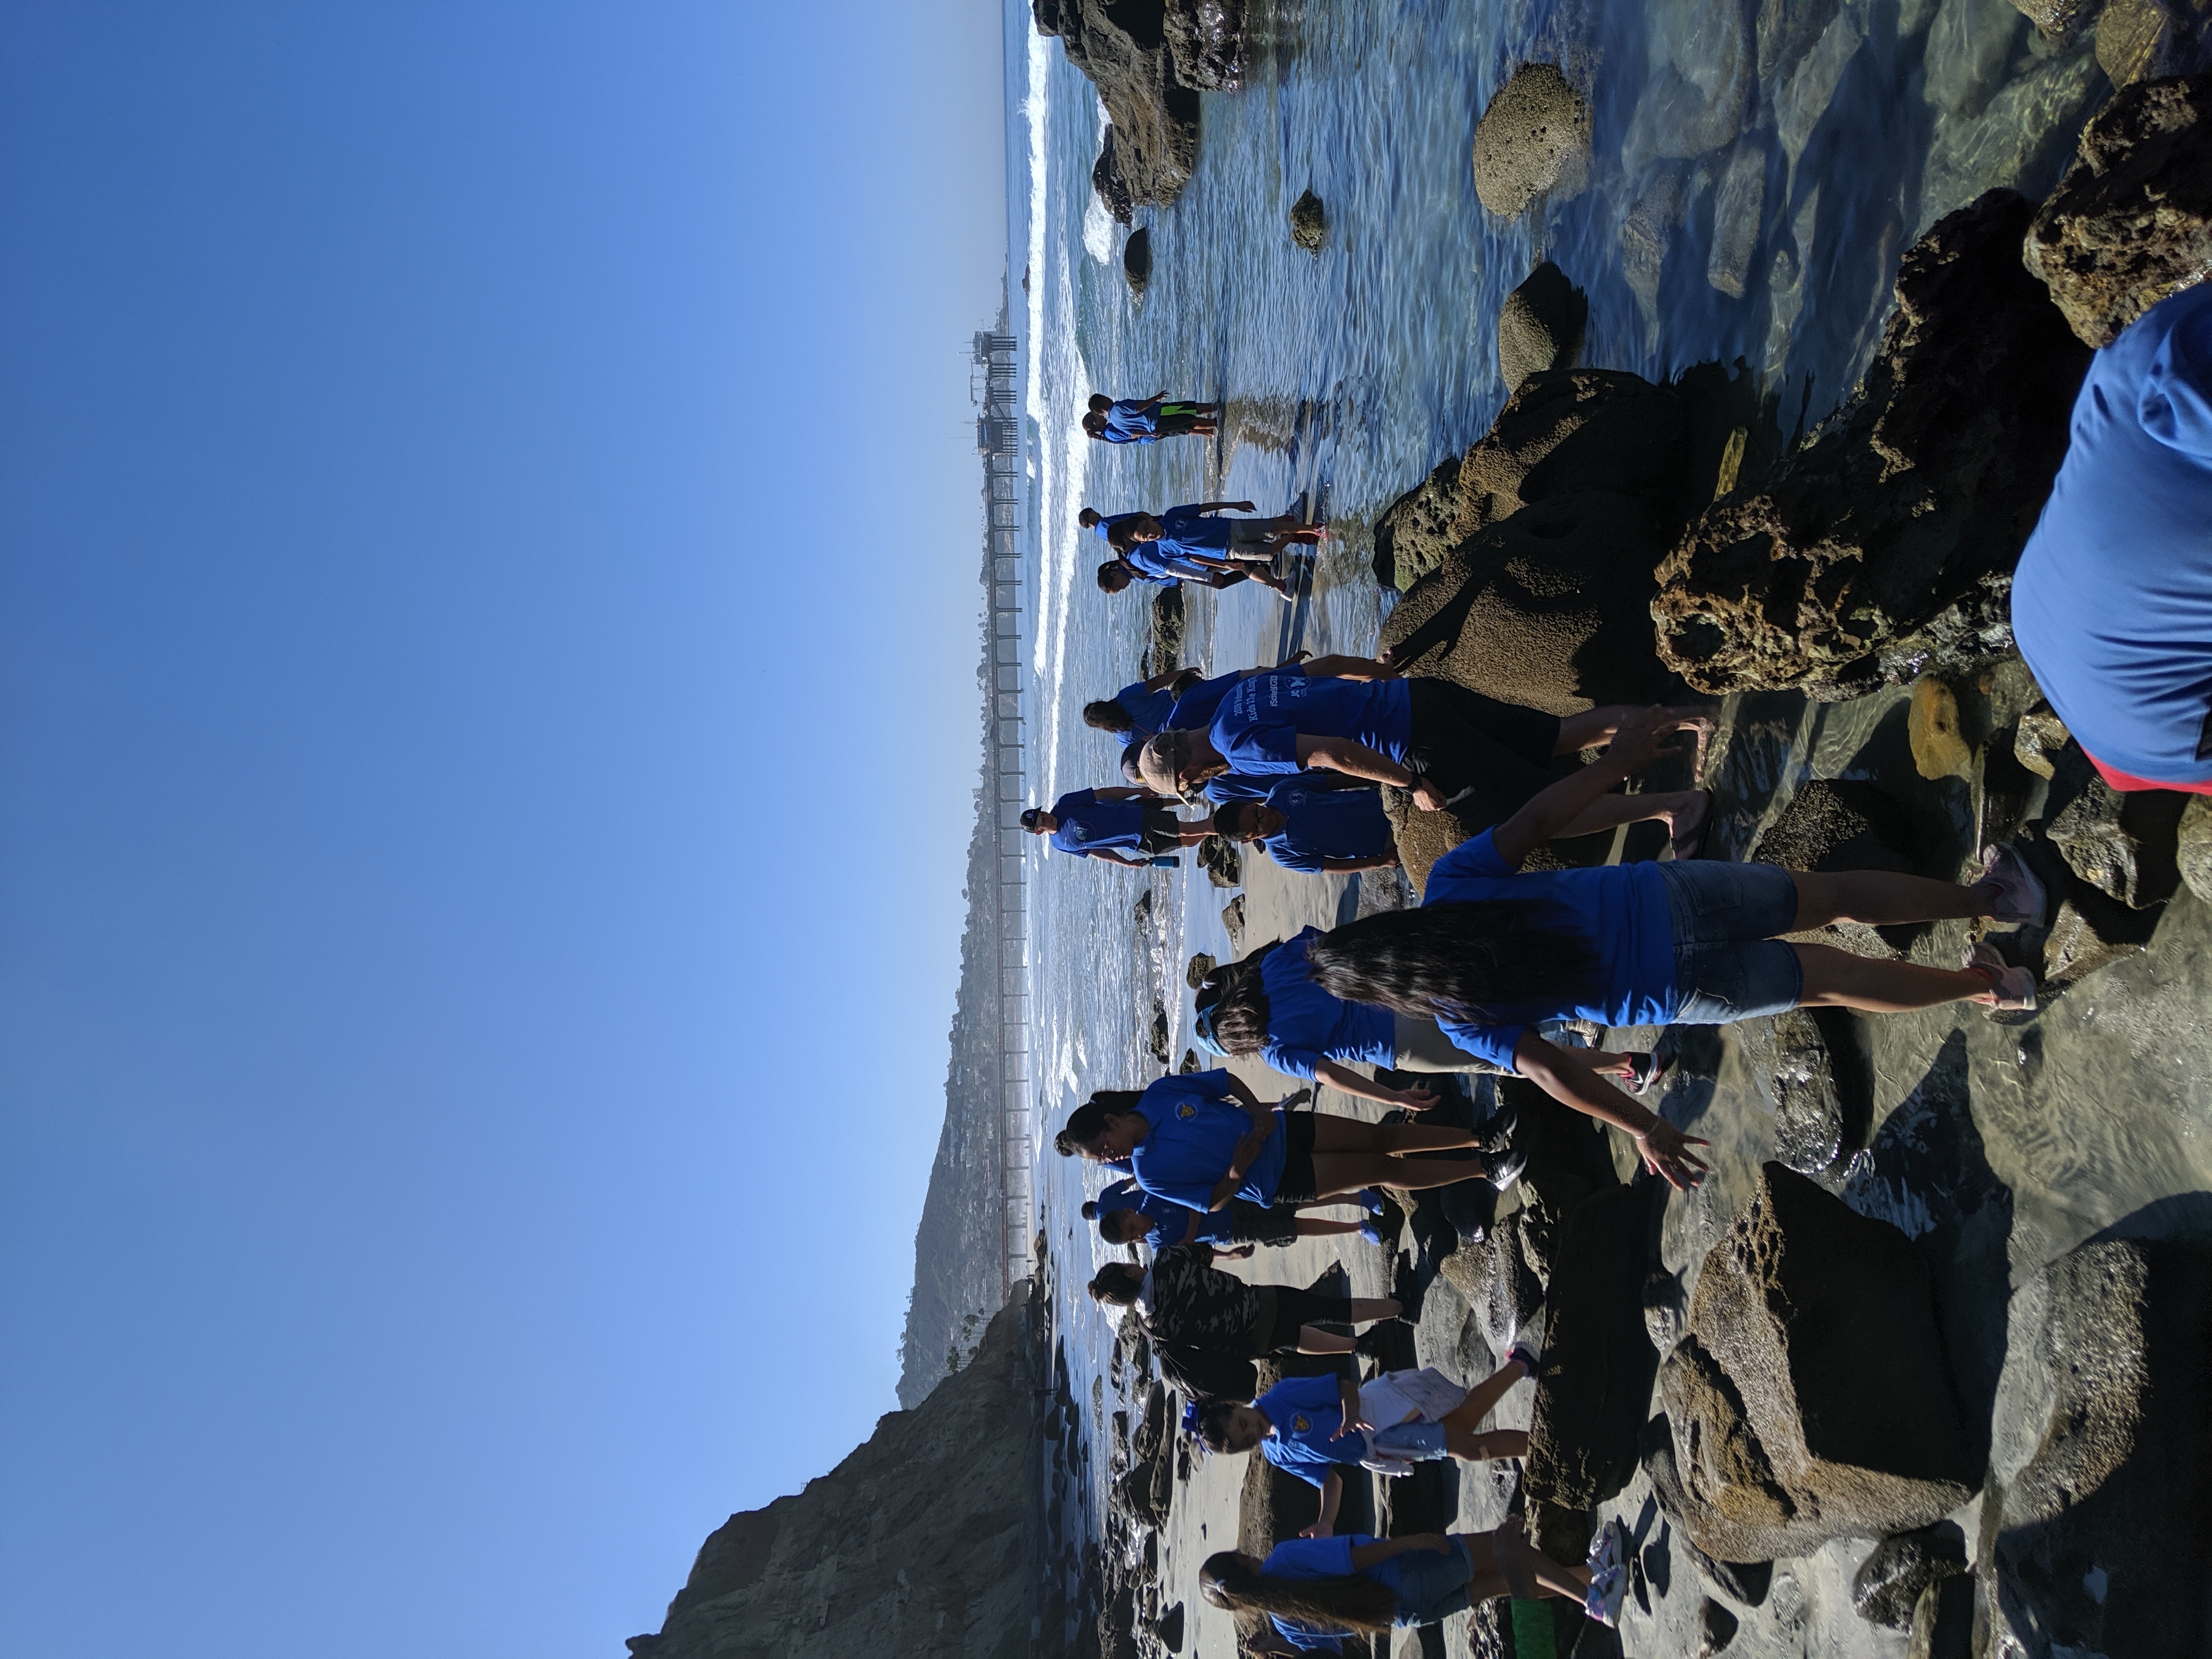 Elementary school children exploring the beach and tidepools.